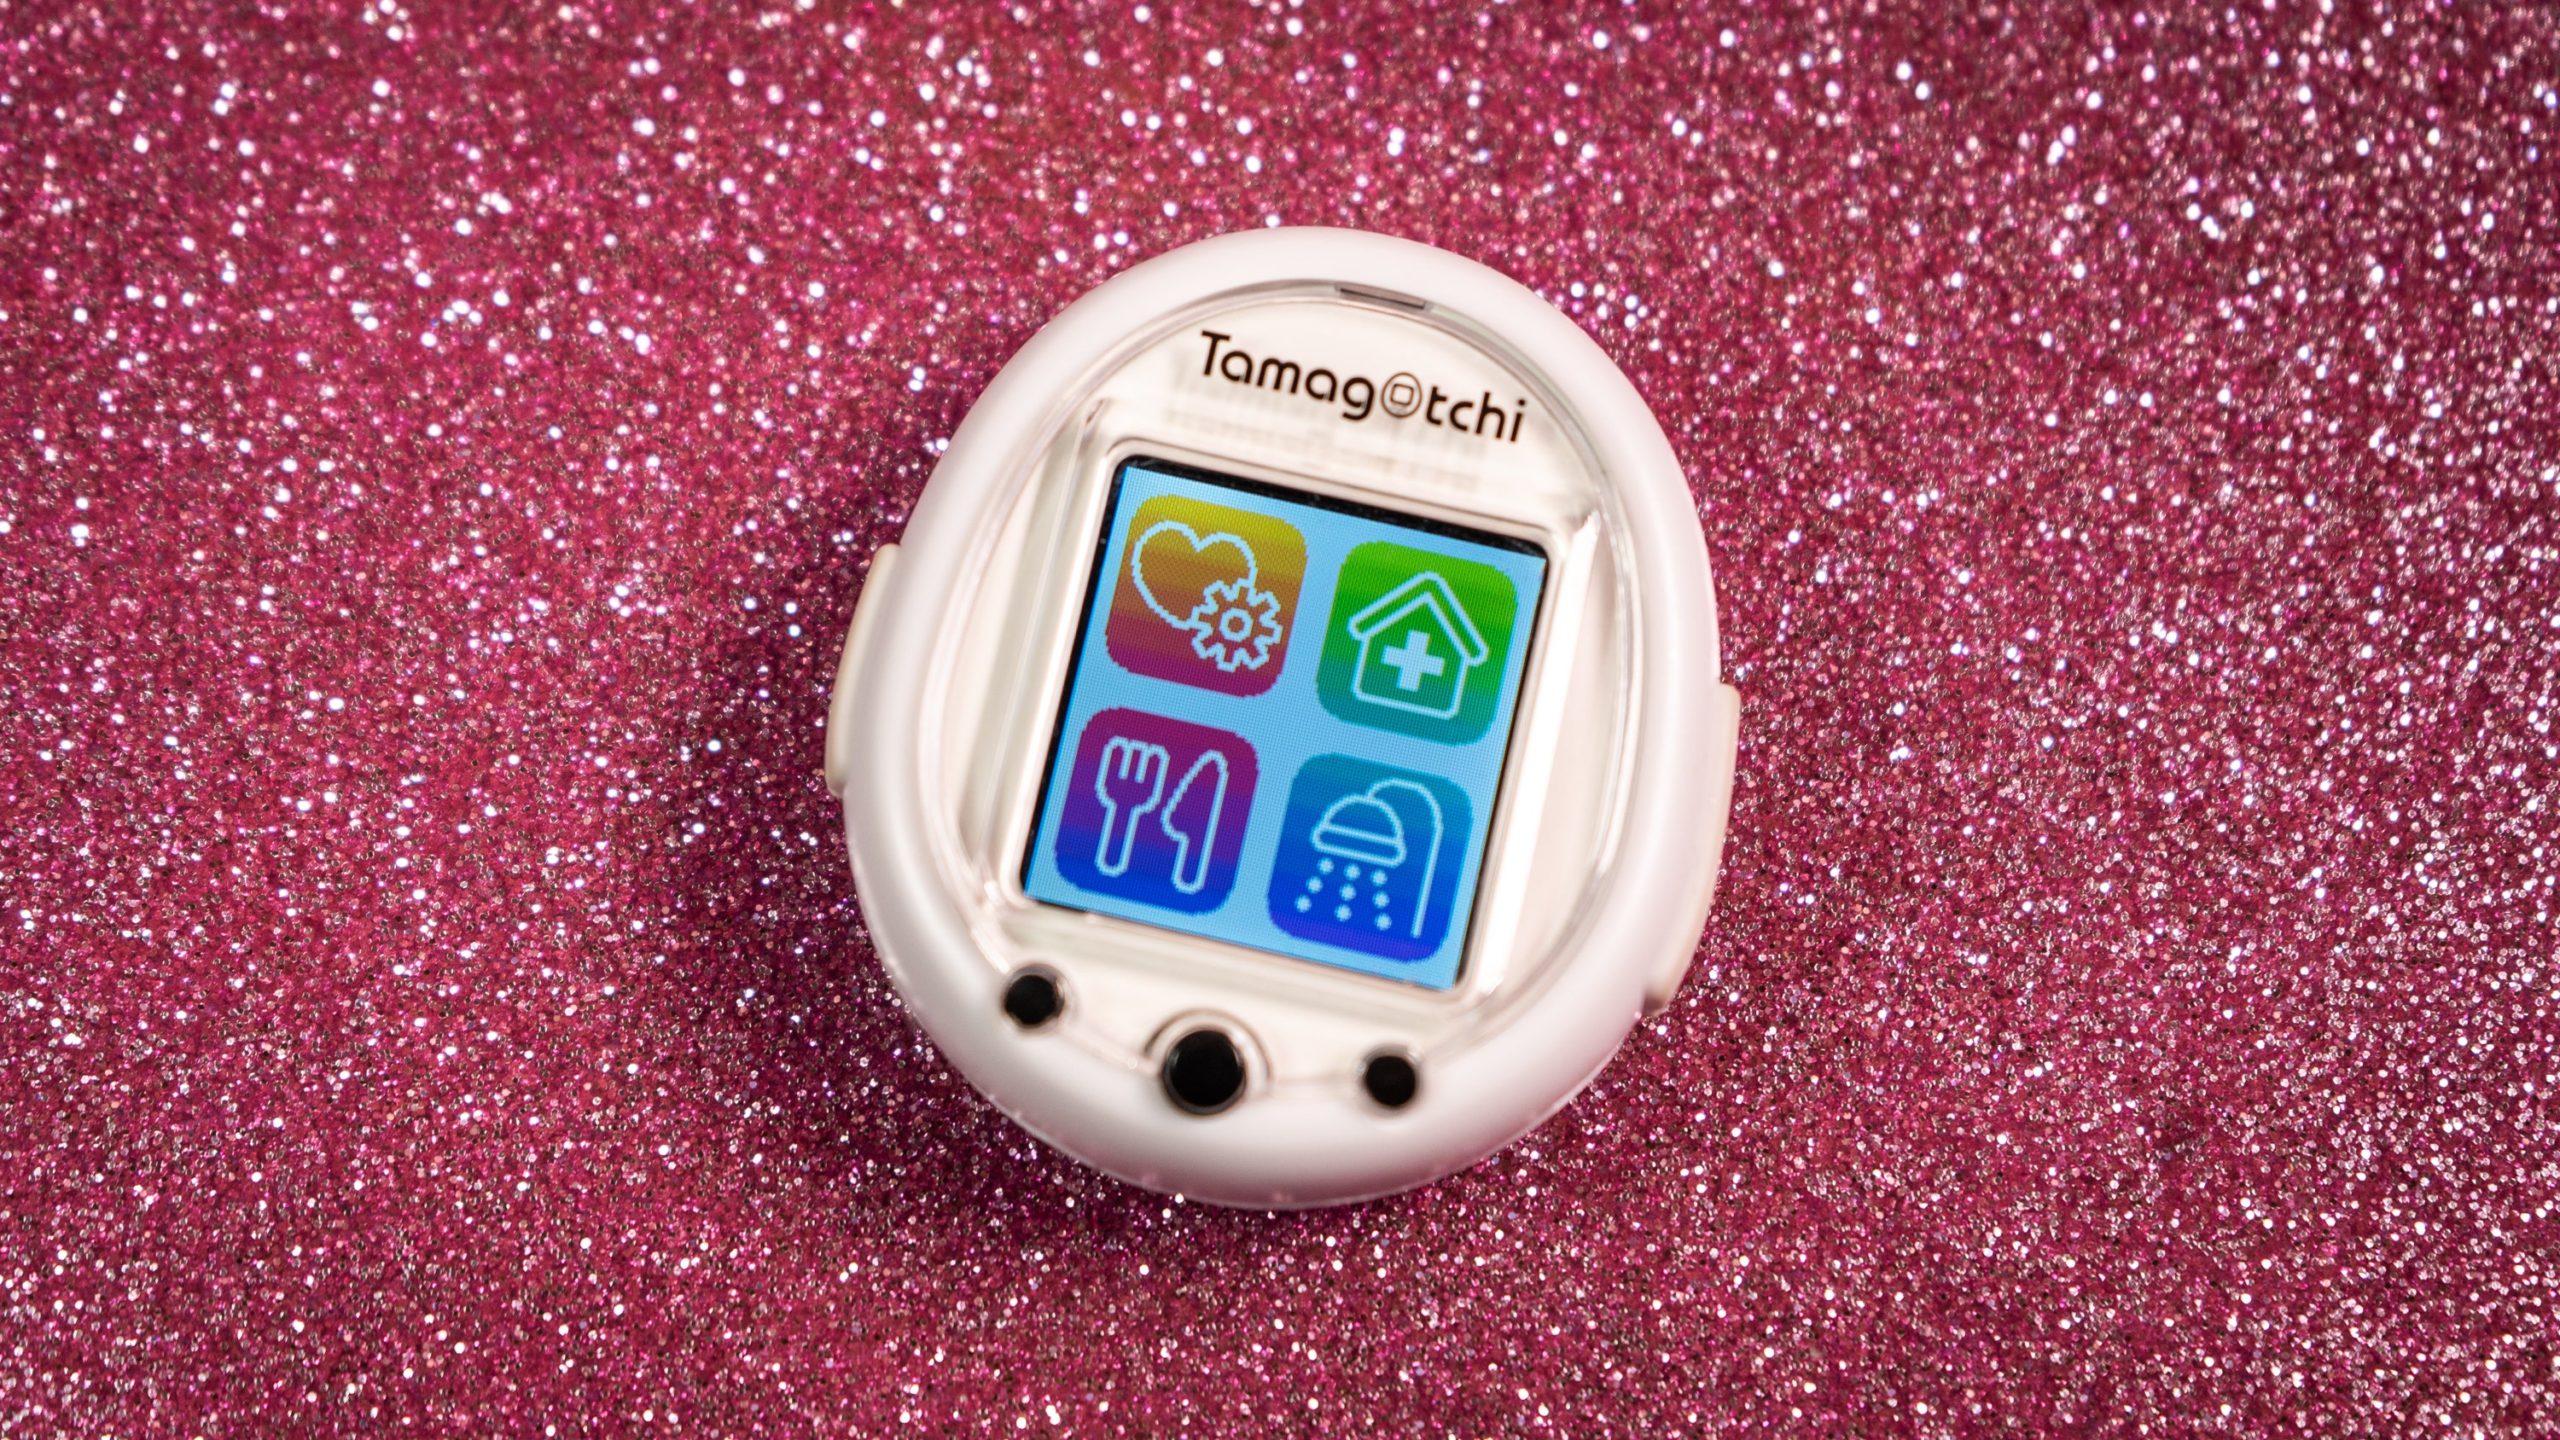 To choose a menu option on the Tamagotchi Smart, you tap the corner with the option rather than run through them with the physical buttons.  (Photo: Florence Ion / Gizmodo)